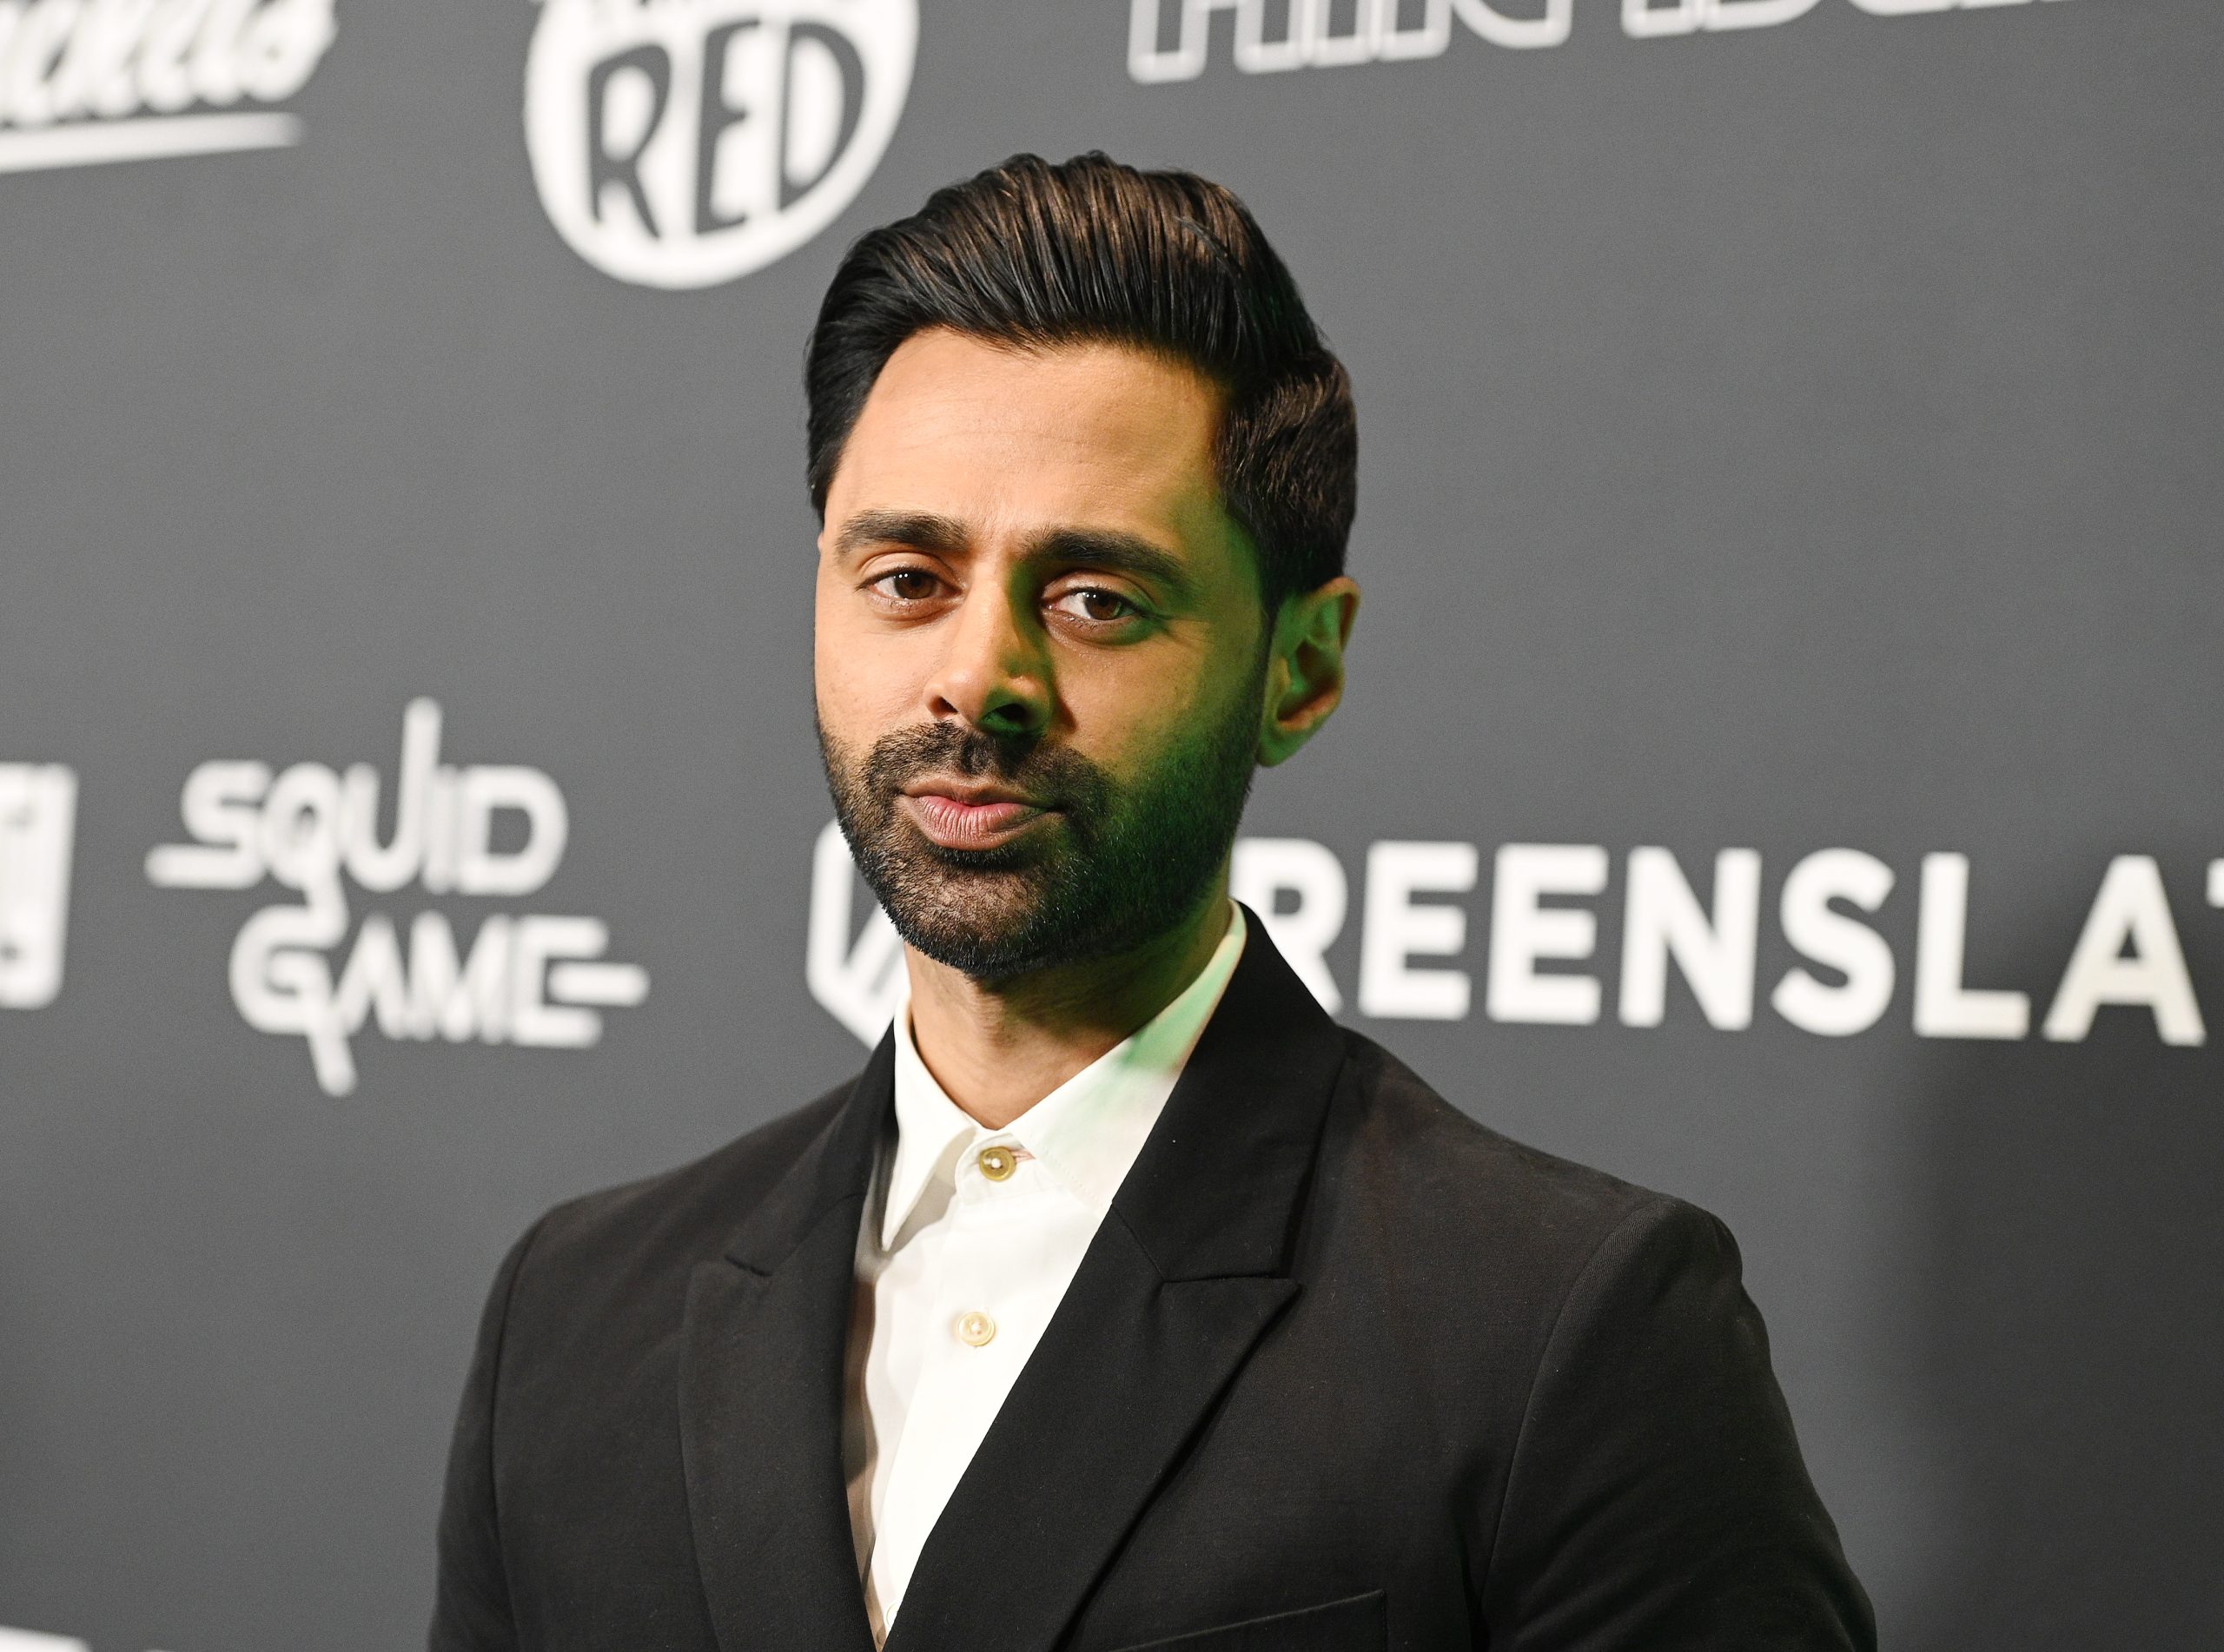 Whoopi Goldberg Defends Hasan Minhaj: Comedians Only Tell ‘Grains of Truth’